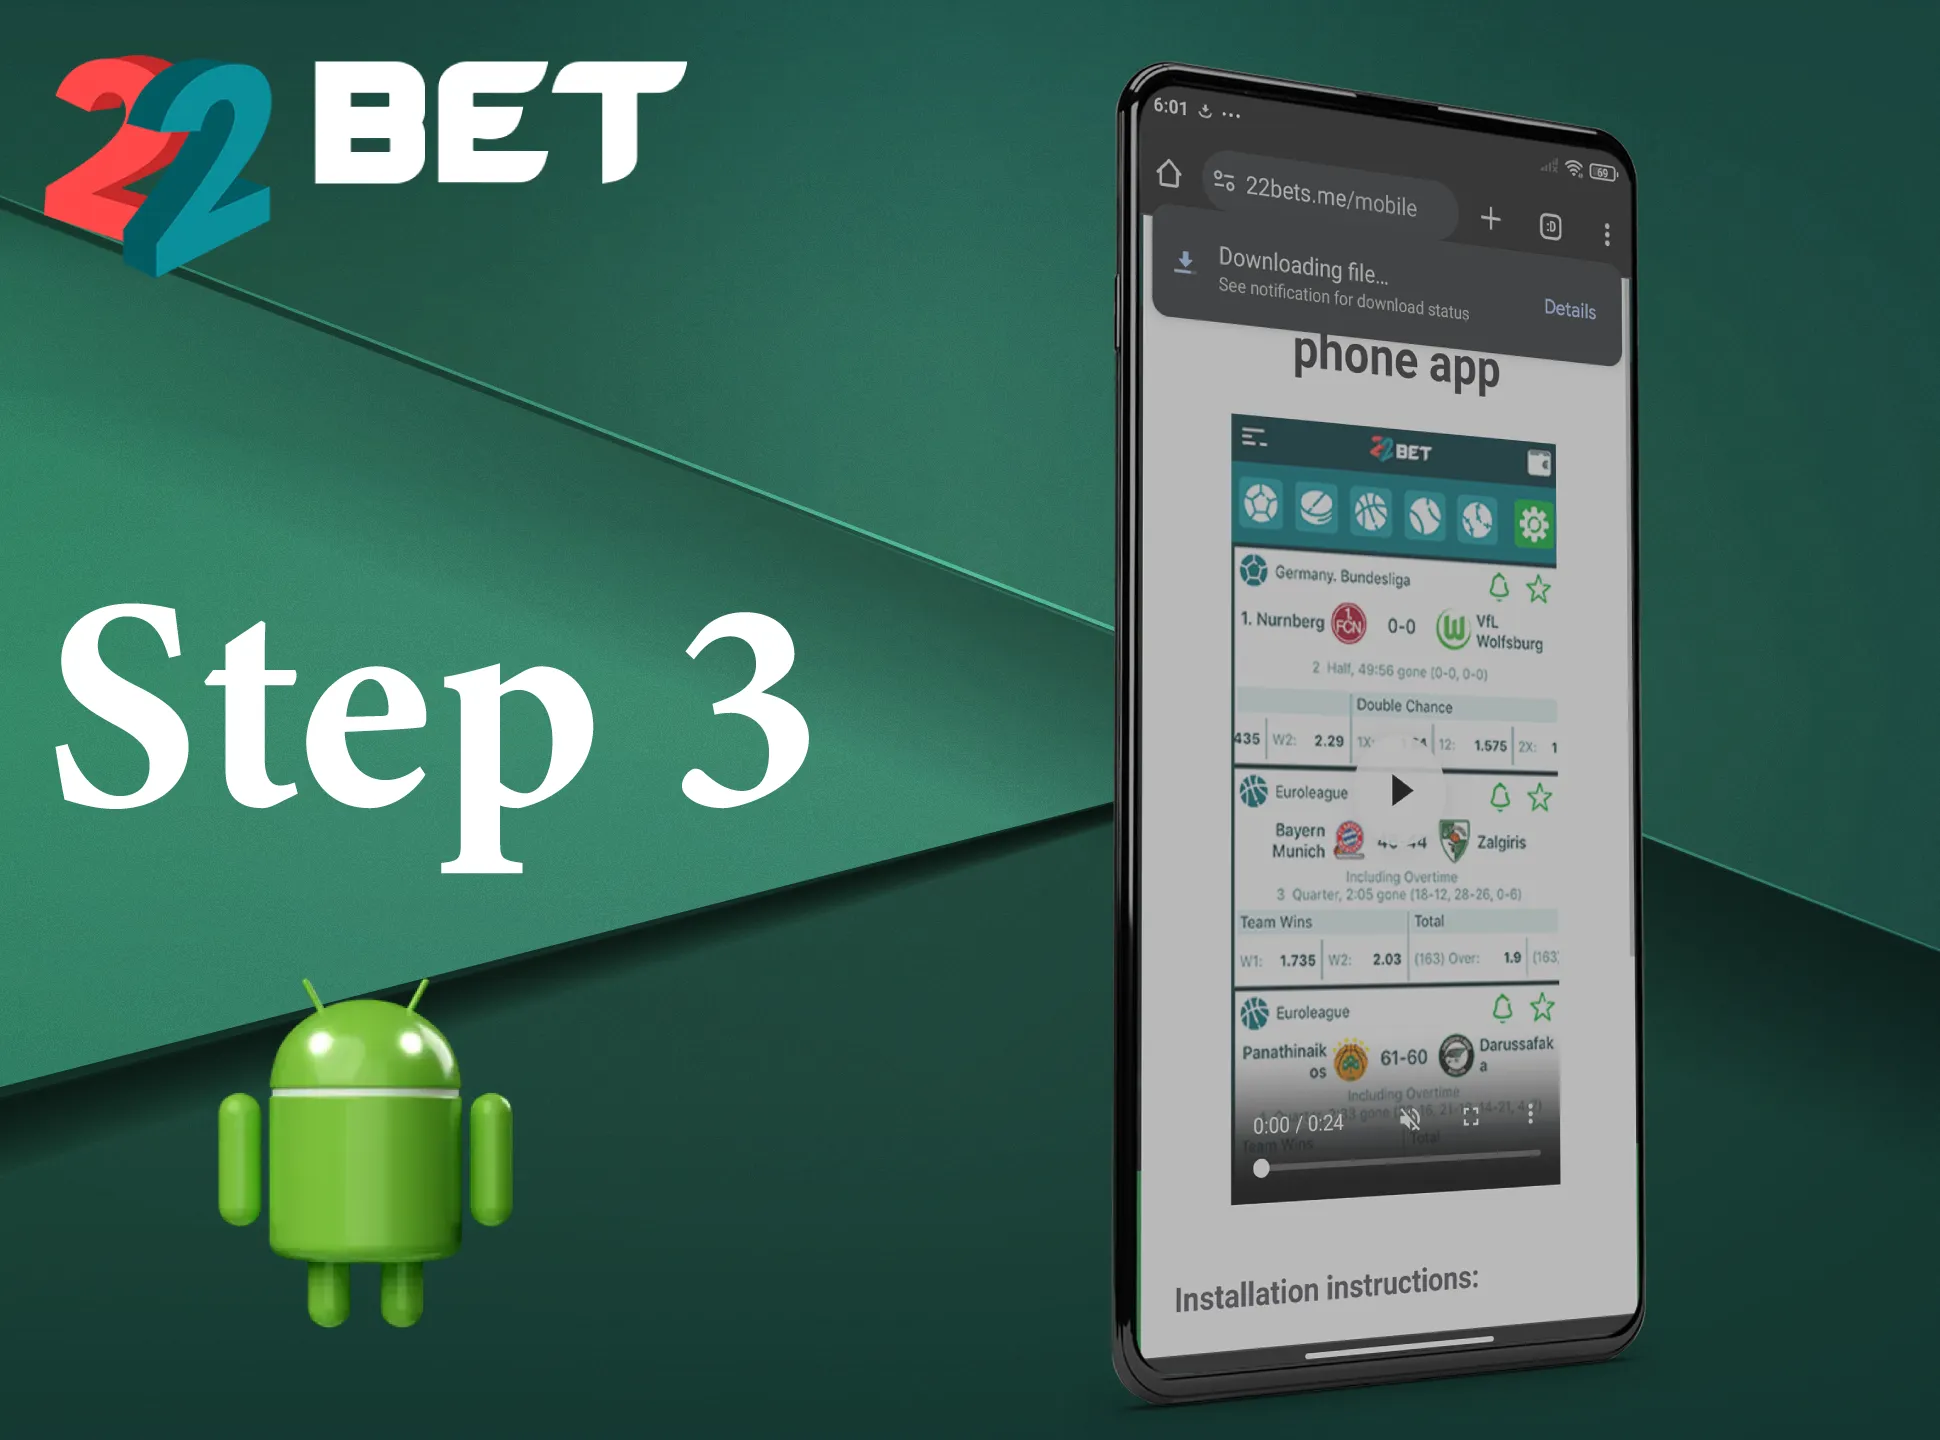 Download the APK file to install the 22Bet app.